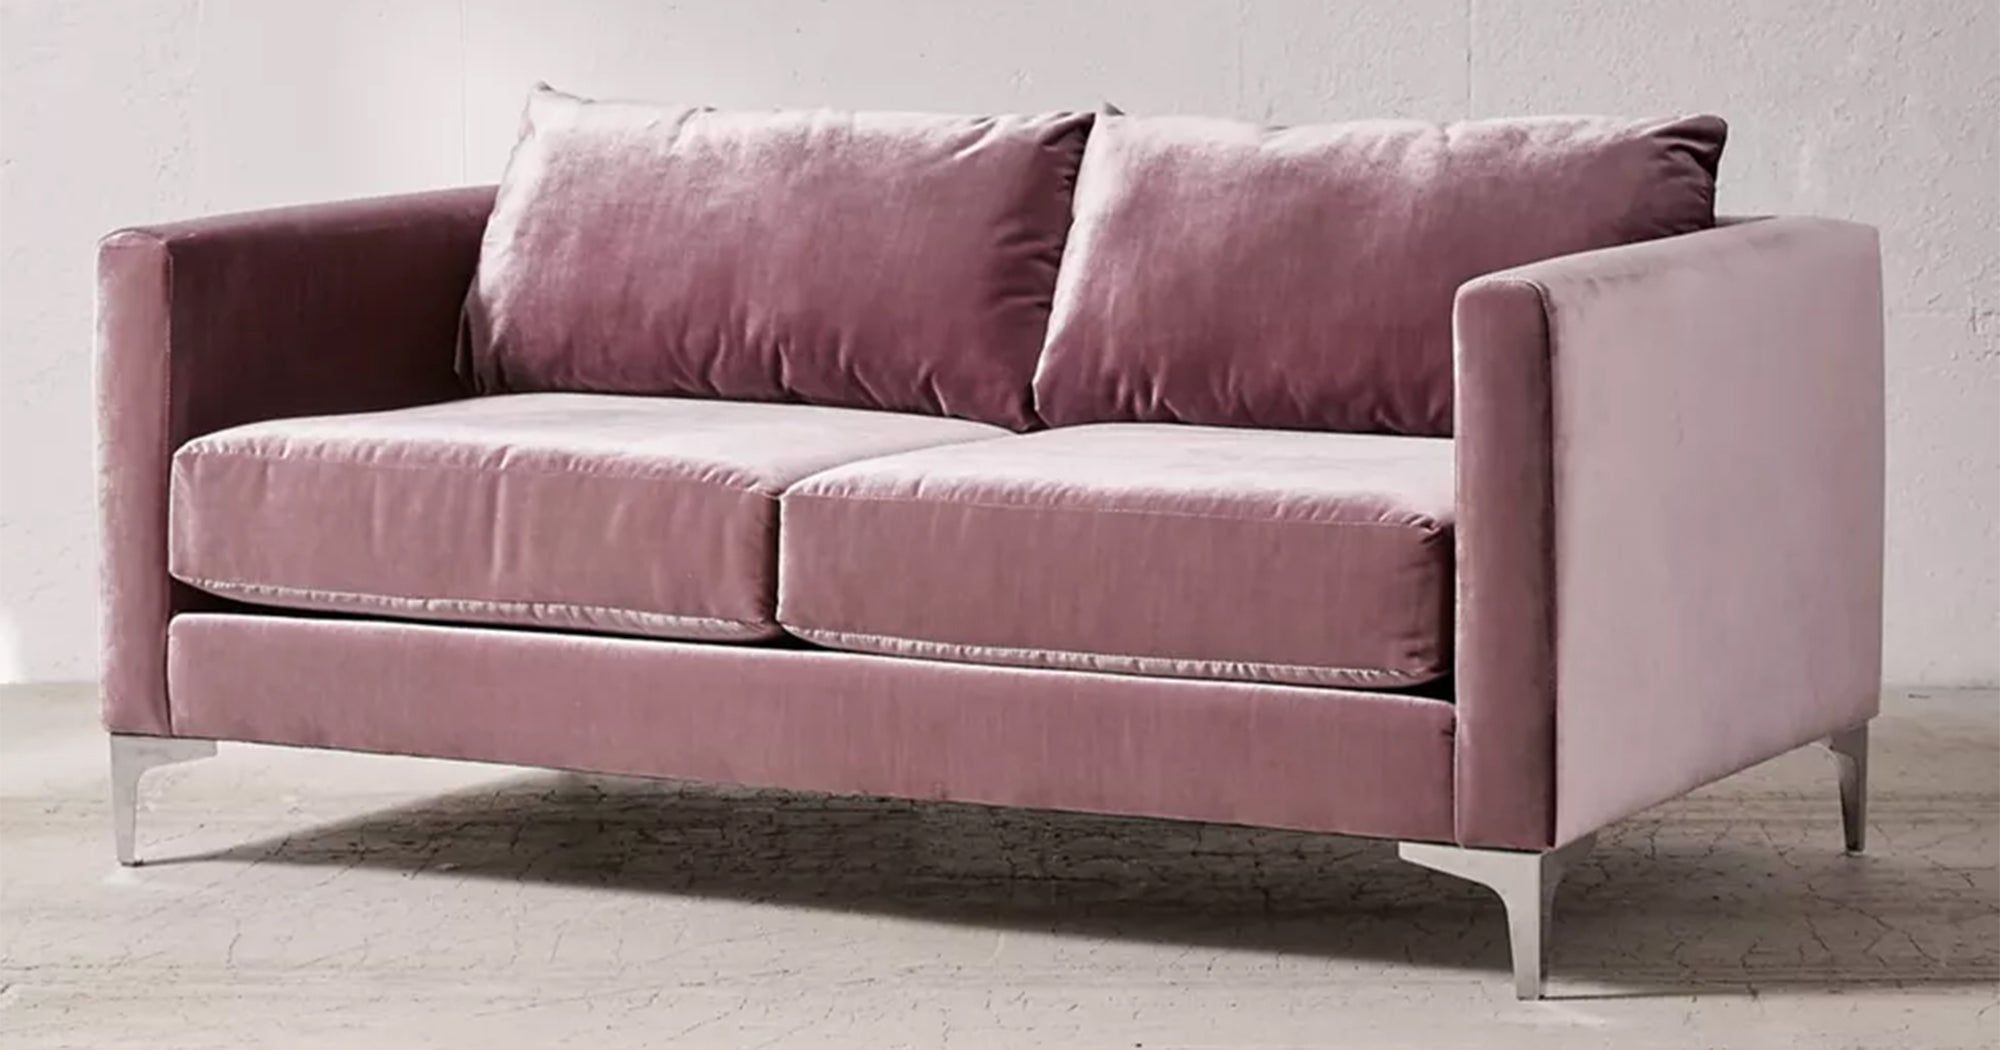 Best Small Loveseats For Affordable & Space Saving Sofa With Small Love Seats In Velvet (Gallery 17 of 21)